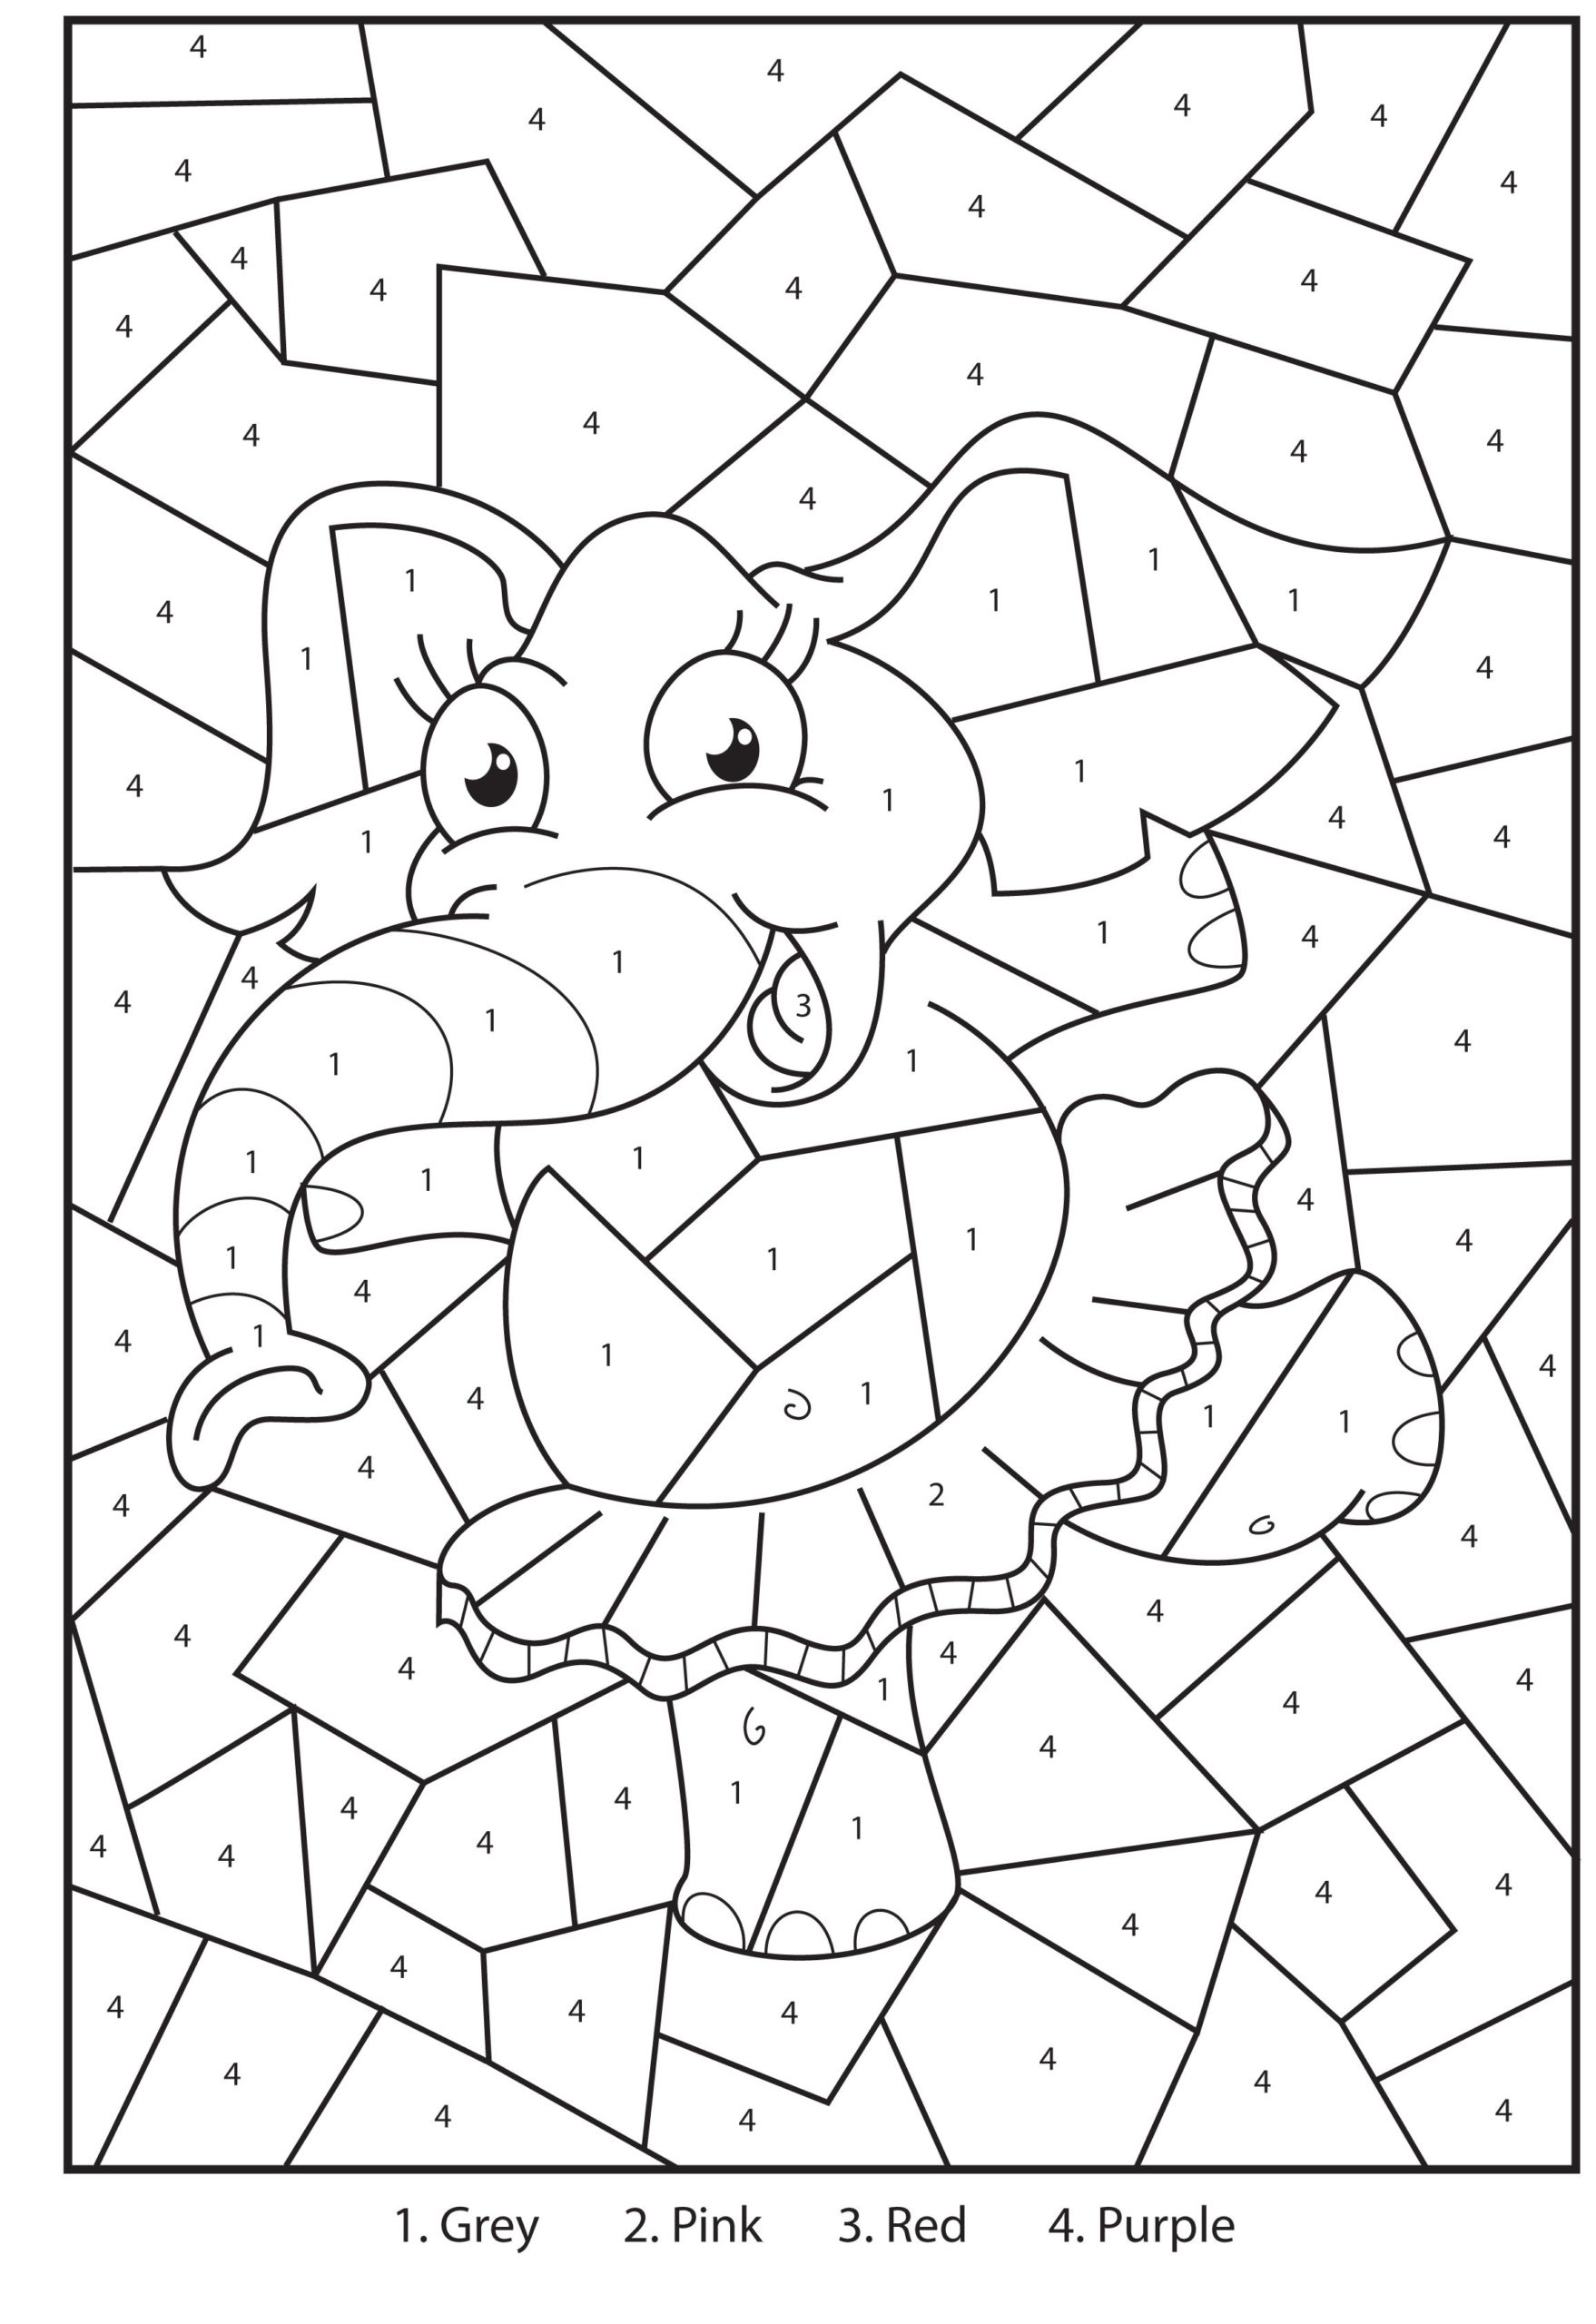 Bright Smile And Fun Page Splendi Free Online Coloring Books Color By Number  Adult Pages Image Ideas Uncategorized Printable Elephant Colour Numbers  Activity For – Slavyanka